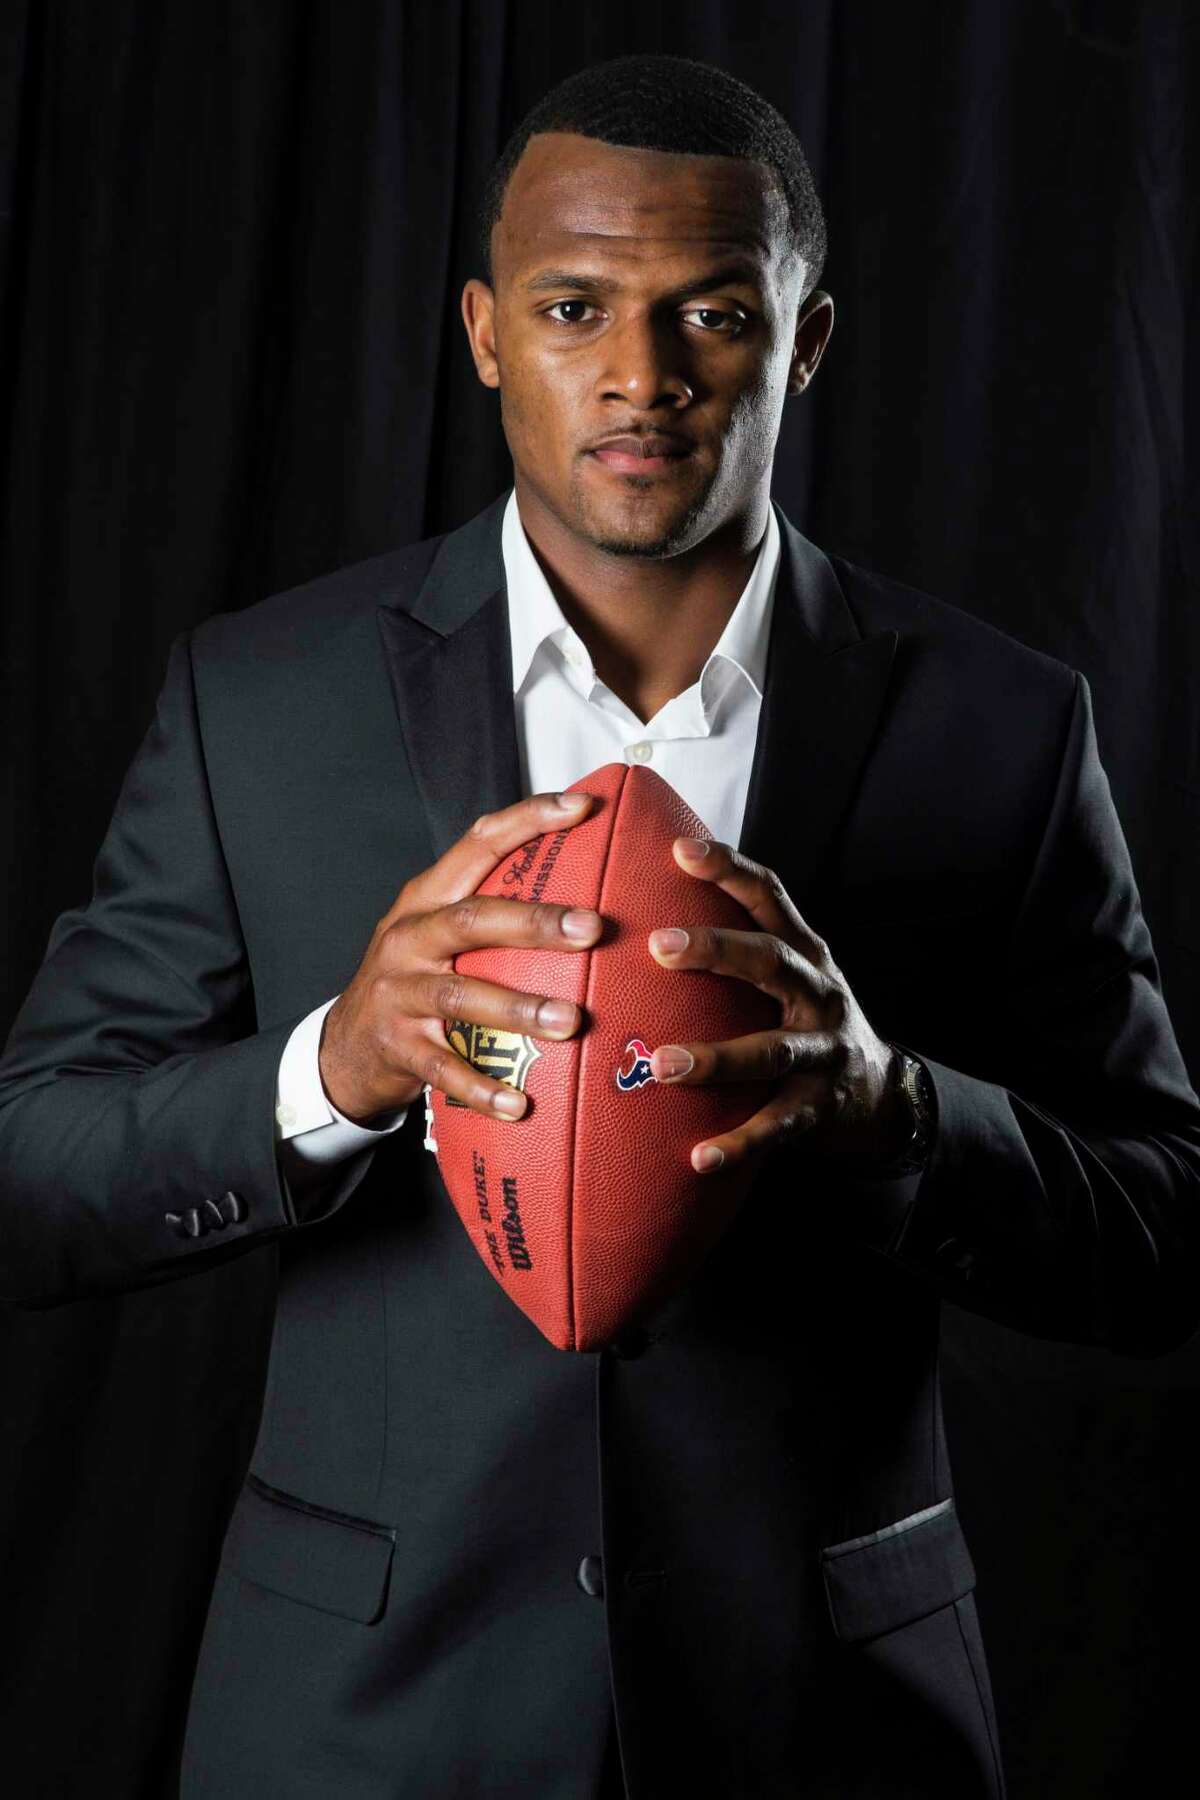 Texans top draft pick Deshaun Watson from Clemson impressed even his high school coaches with his passion for studying game film.